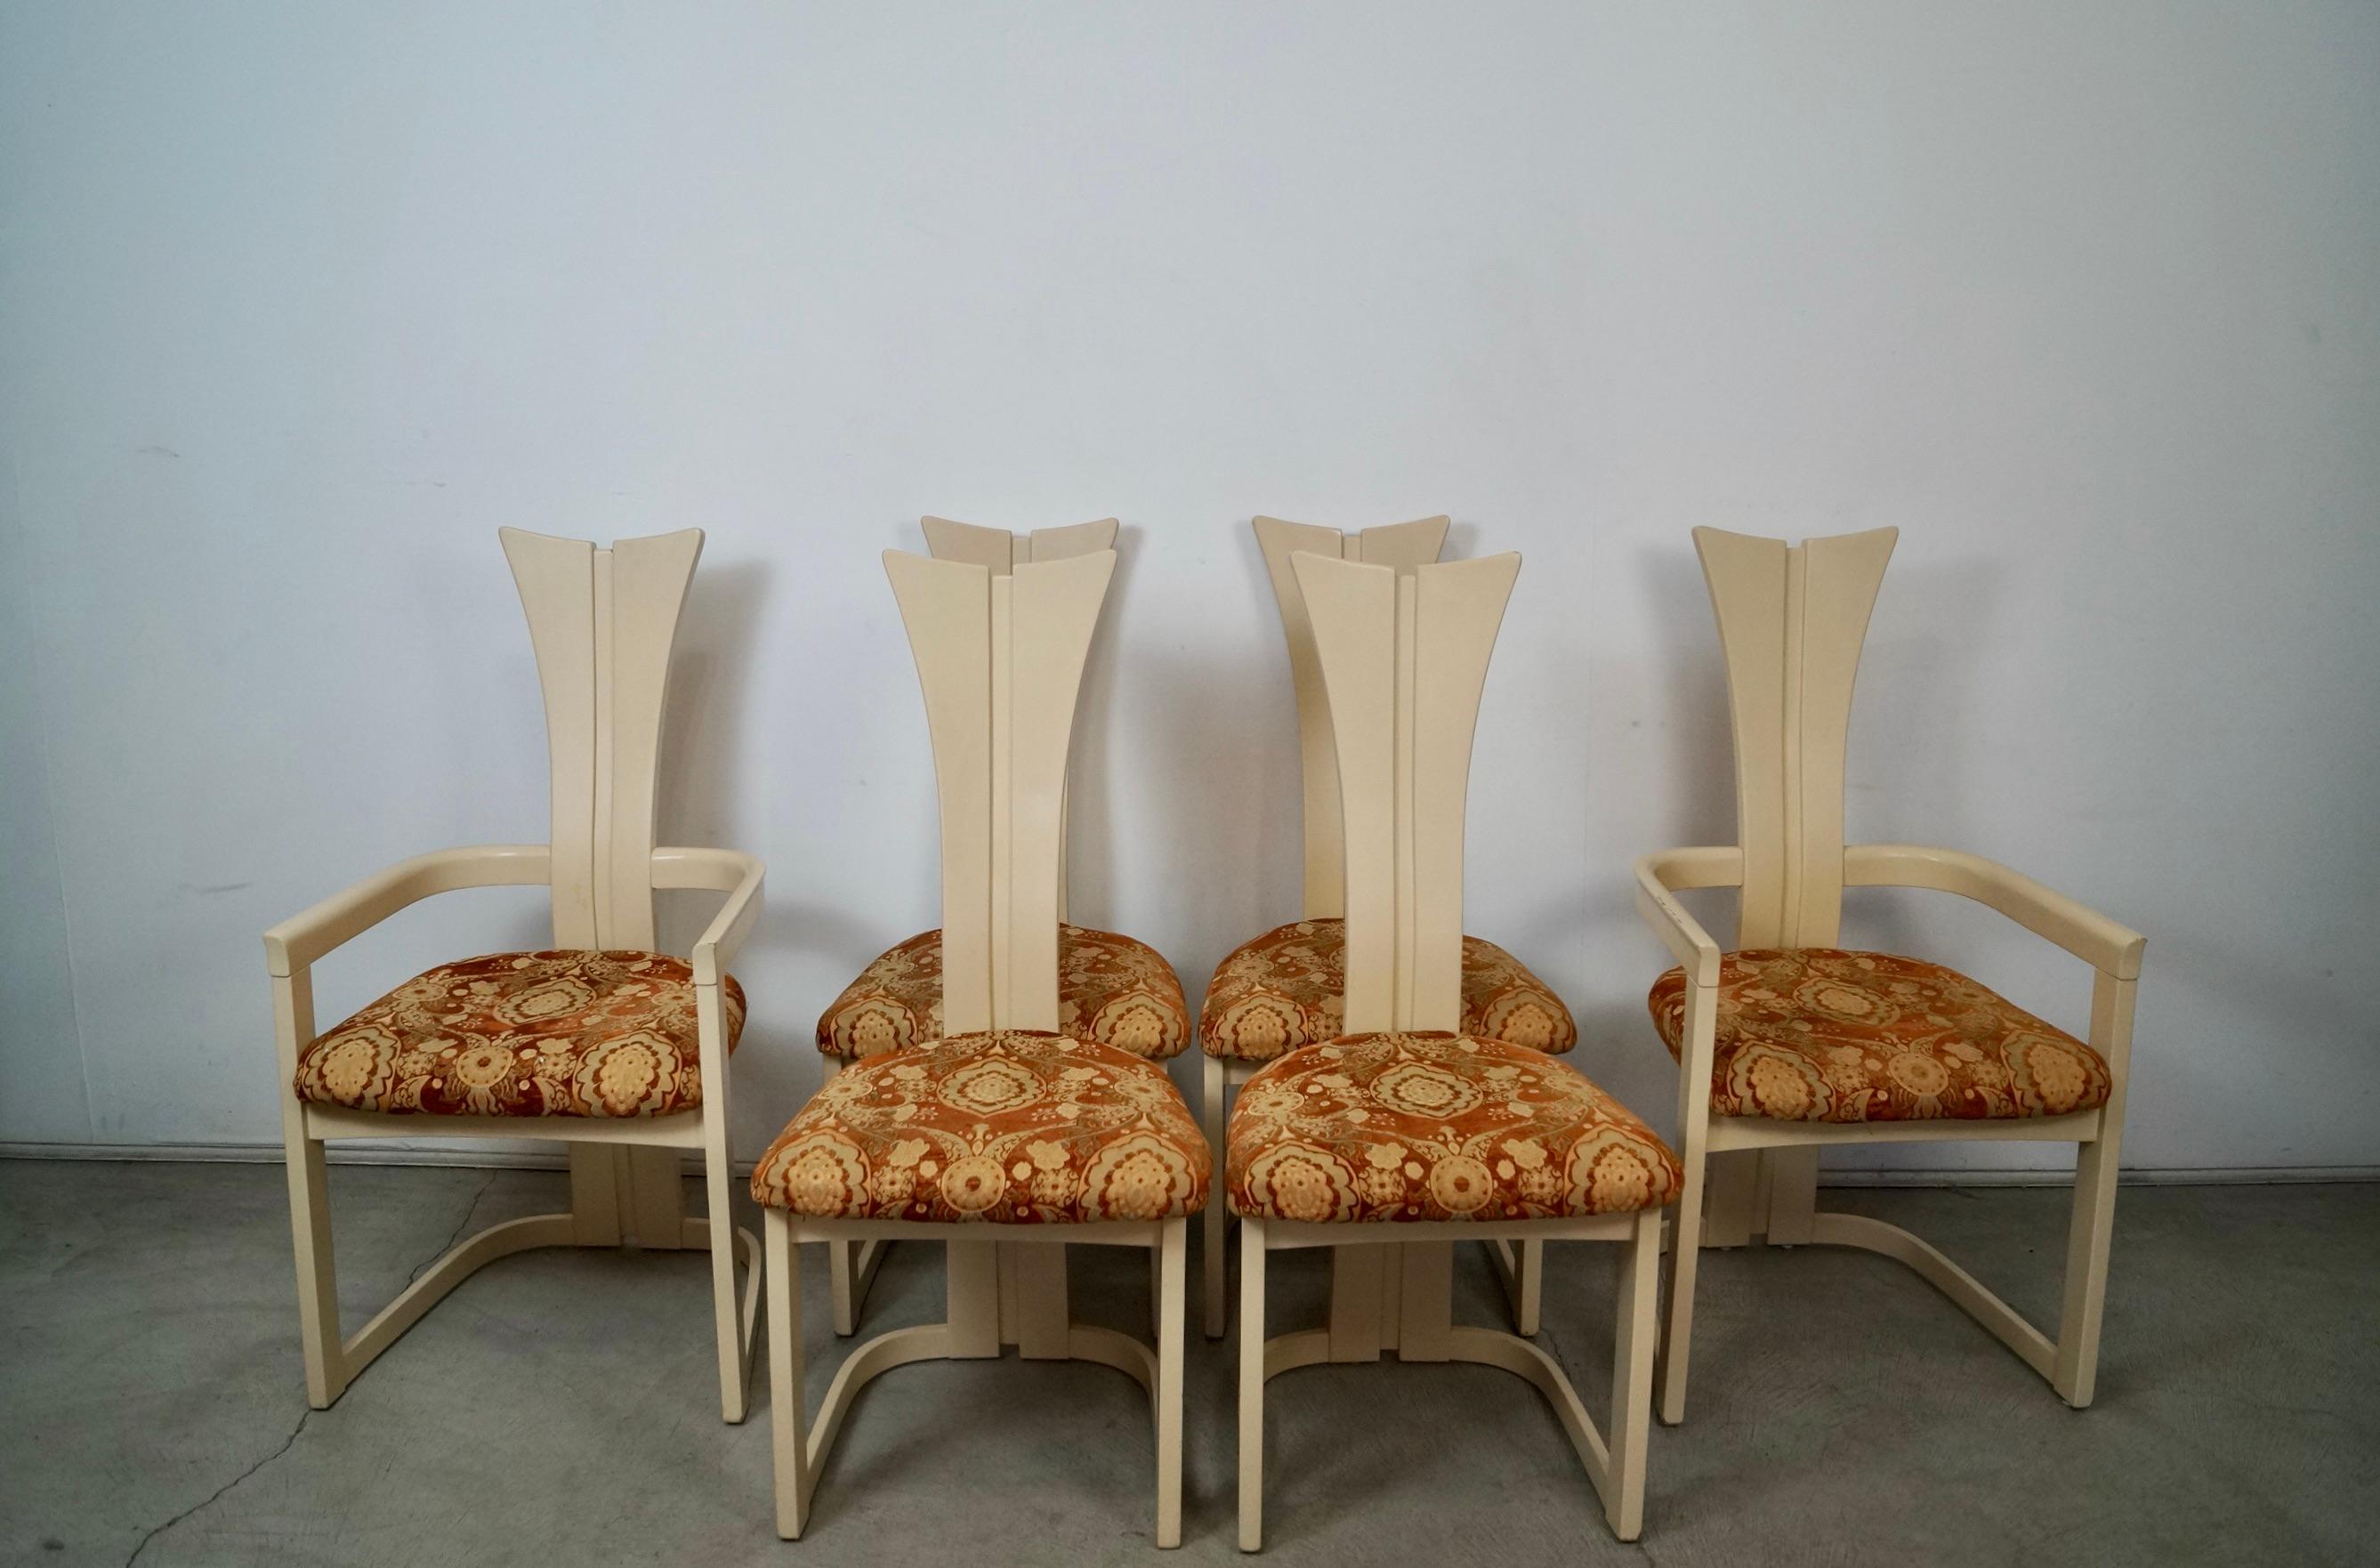 1970's Postmodern Art Deco Italian Lacquered Dining Chairs - Set of Six In Fair Condition For Sale In Burbank, CA